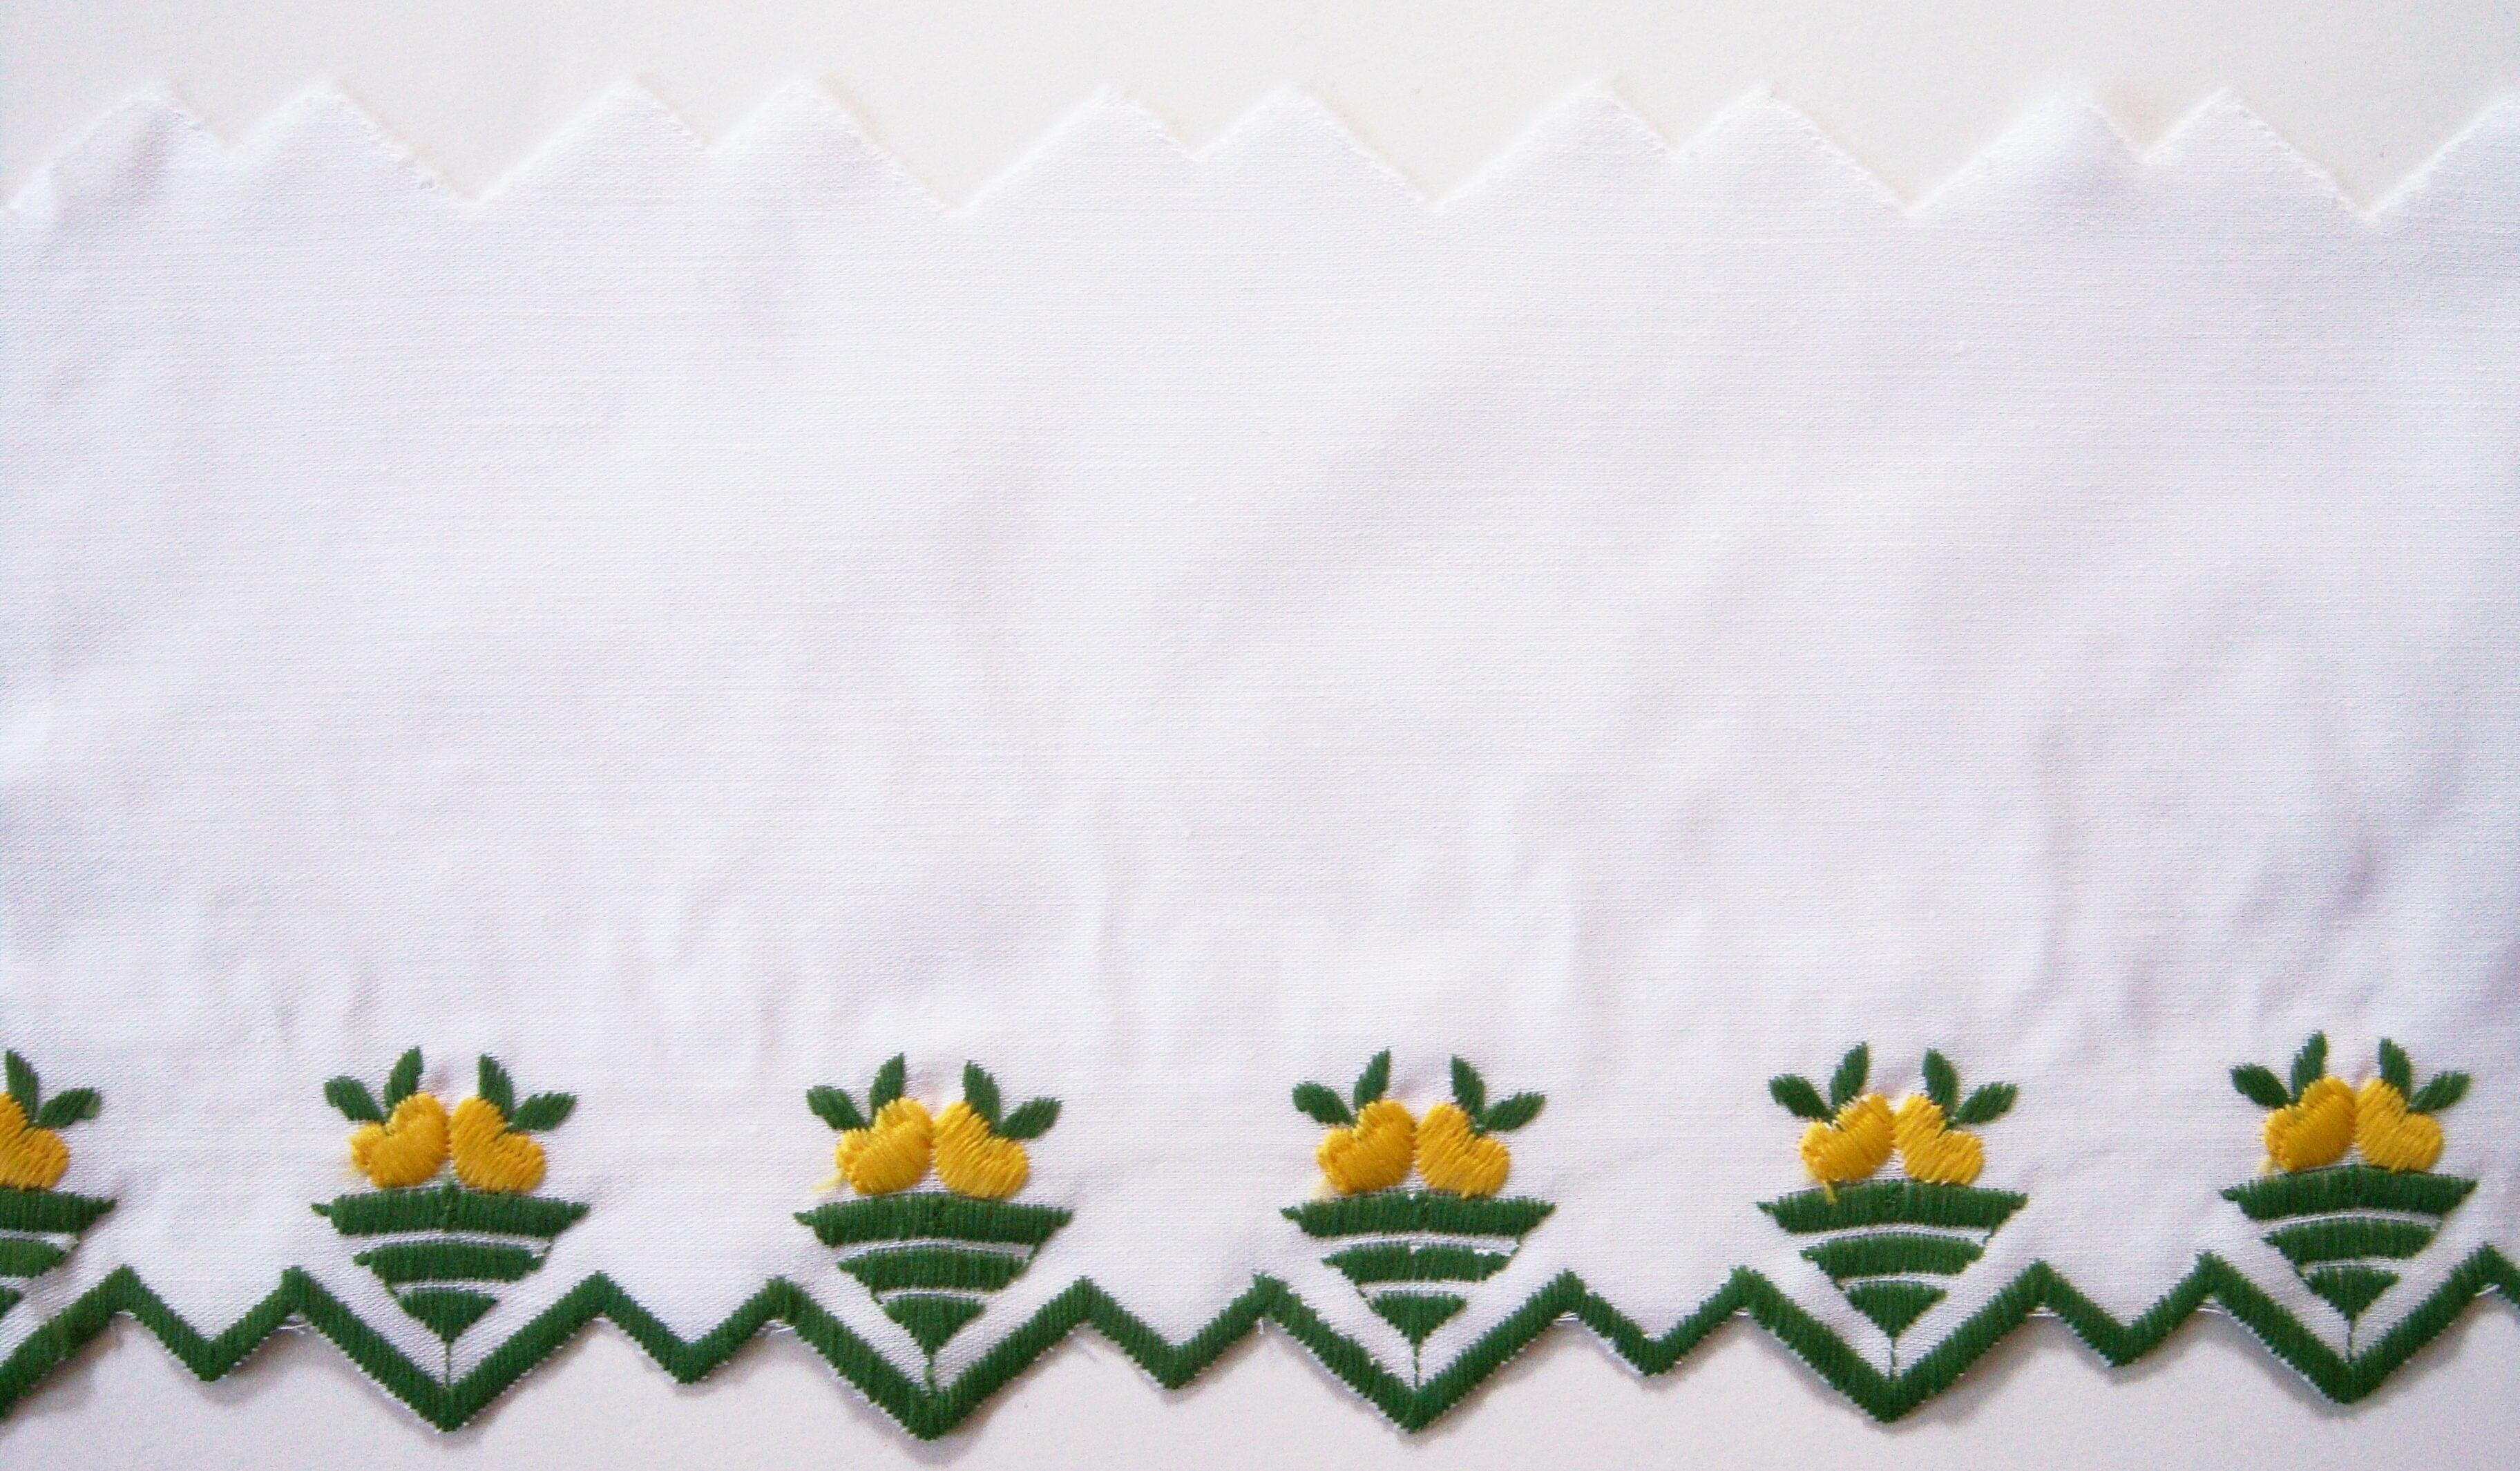 White/Green/Gold 5 1/4" Embroidered Cotton